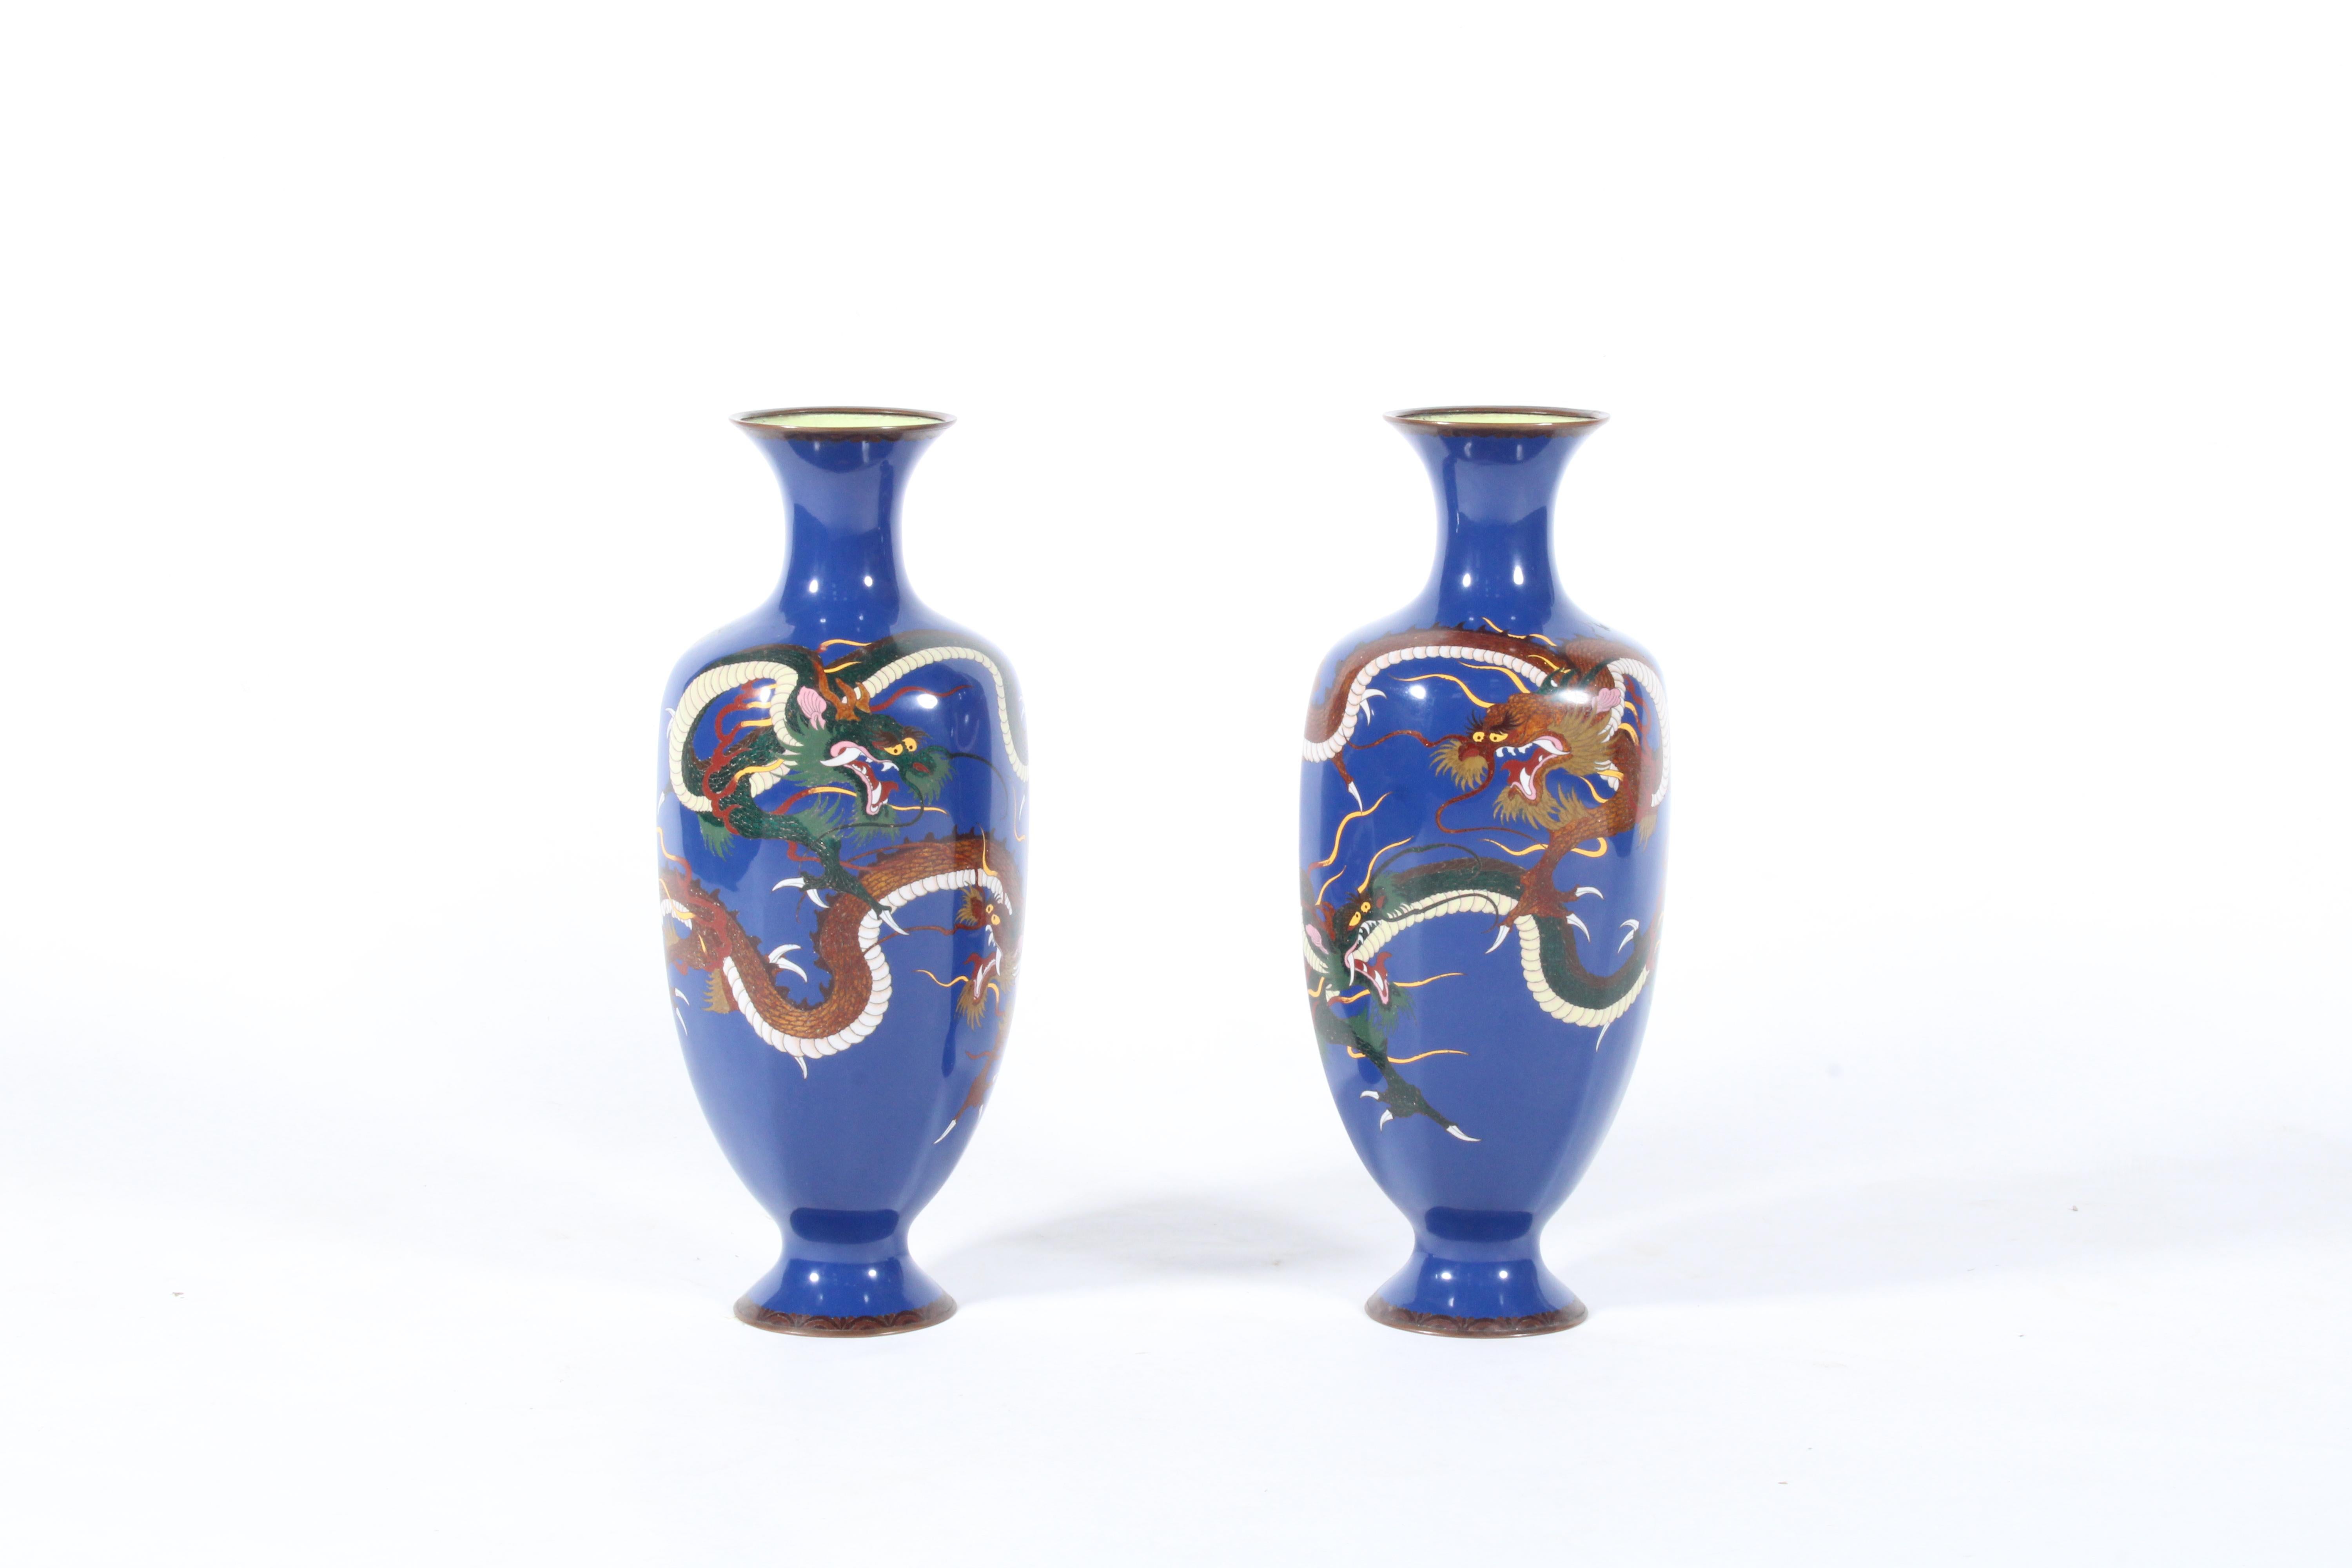 An incredible pair of enameled cloisonné Japenese vases. Dating from circa 1950 this stunning duo are both tactile and incredibly decorative, the perfect pair to dress your sideboard or console table and to create a real design impact in your home